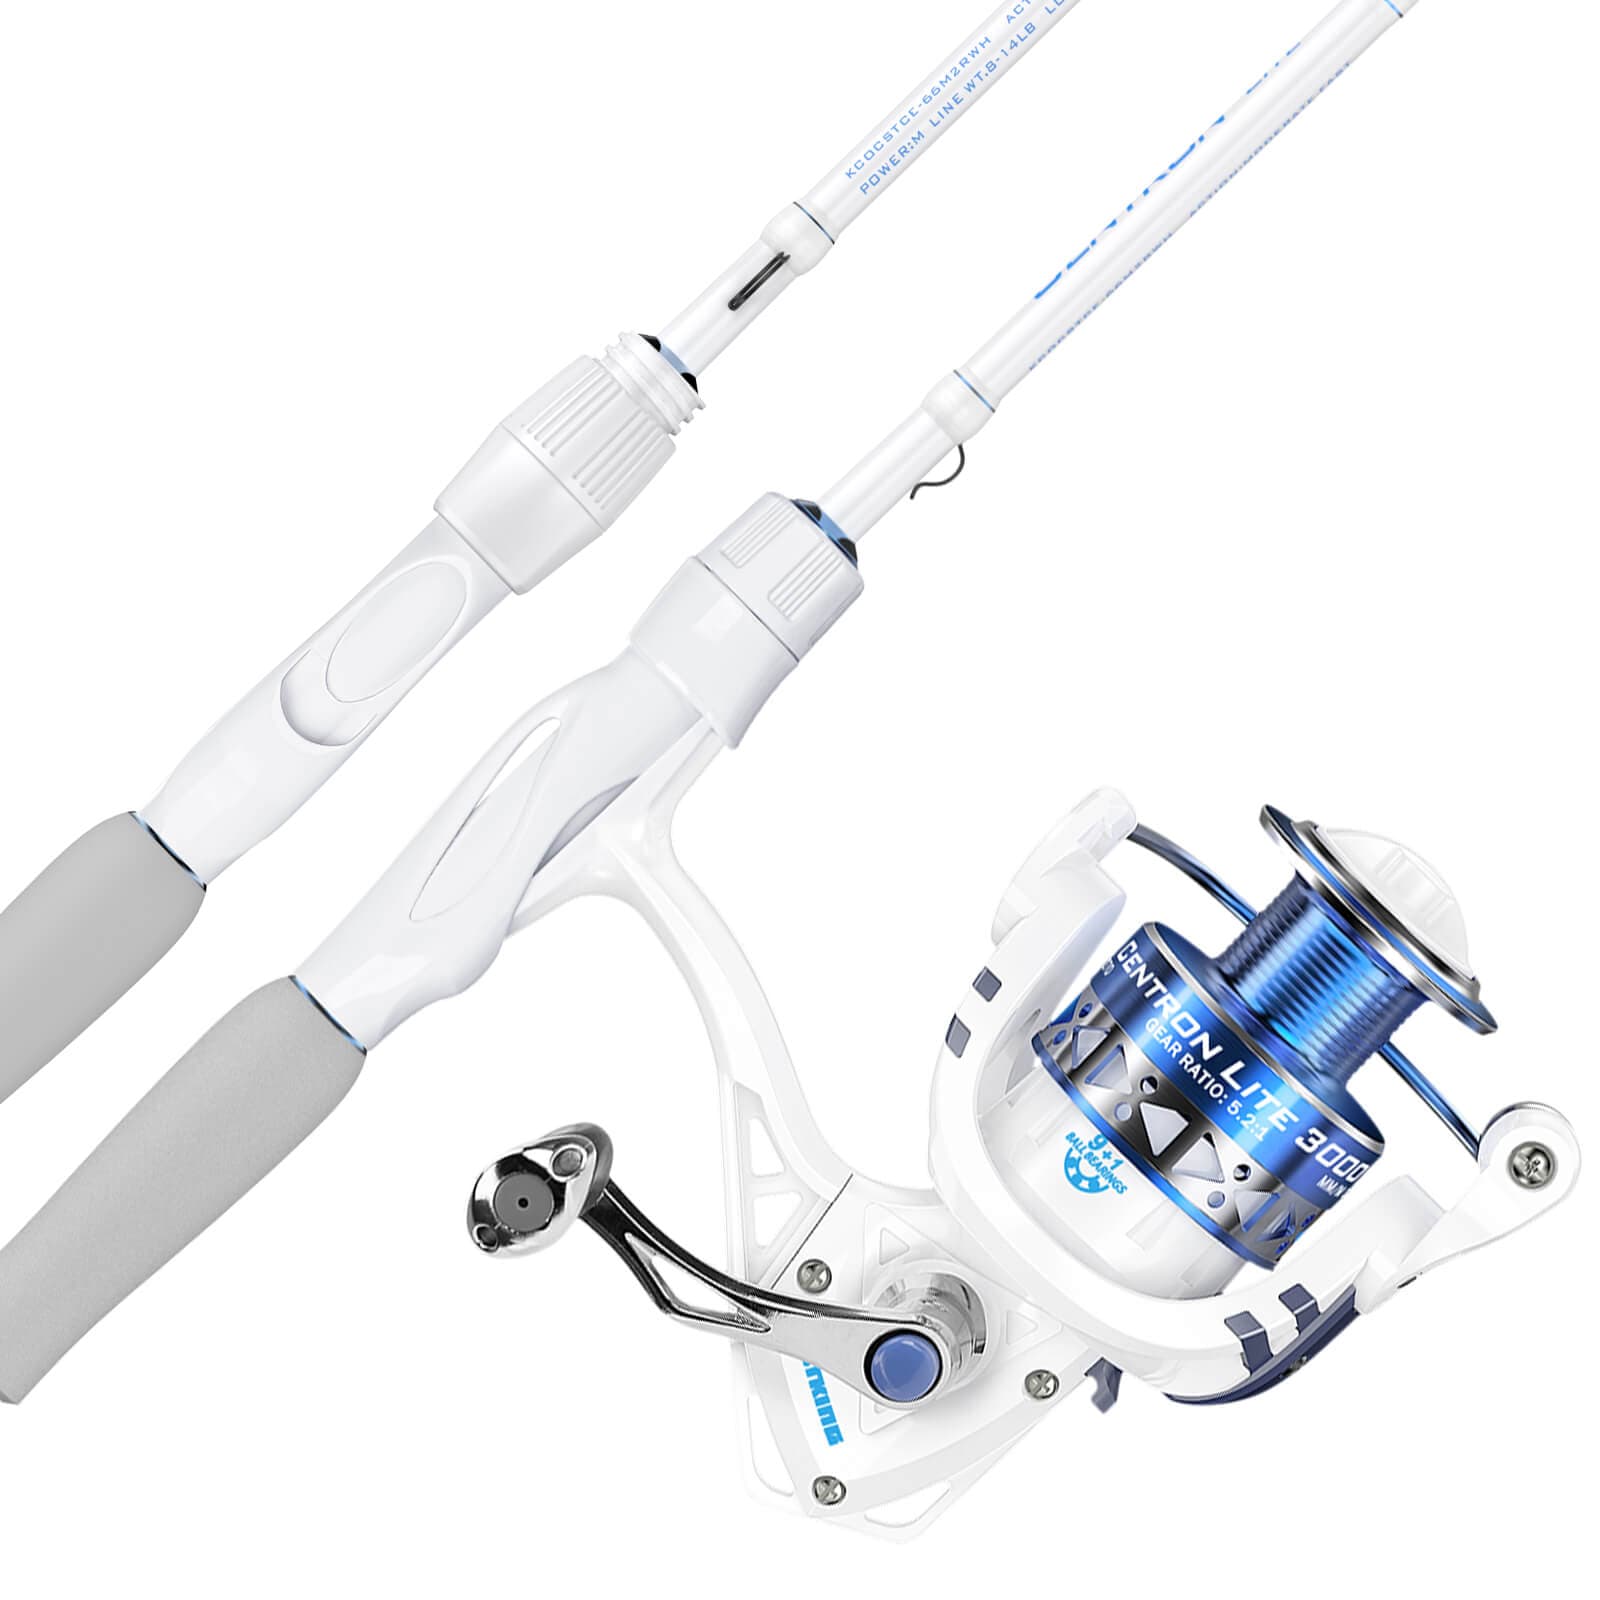 KastKing Centron Lite Spinning Rod and Reel Combo - 6'0/Moderate  Fast-Medium Light-2pcs/2000 Reel